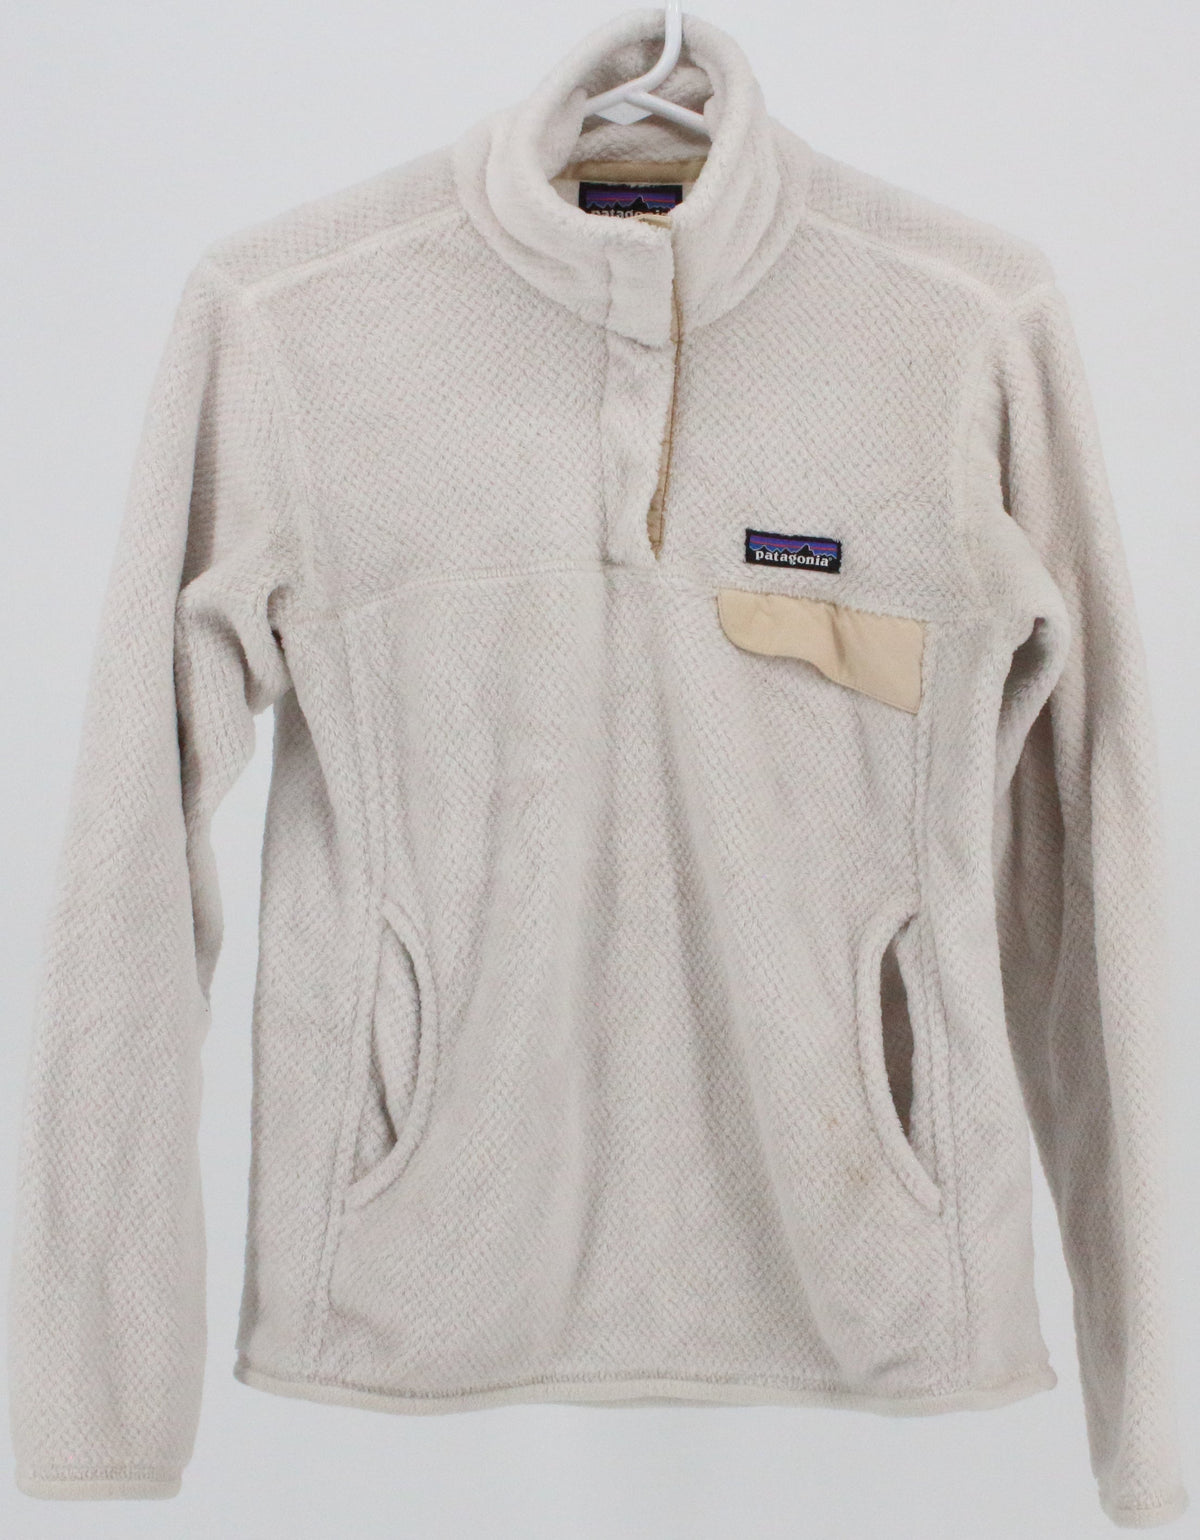 Patagonia White and Beige Front Pocket Women's Fleece